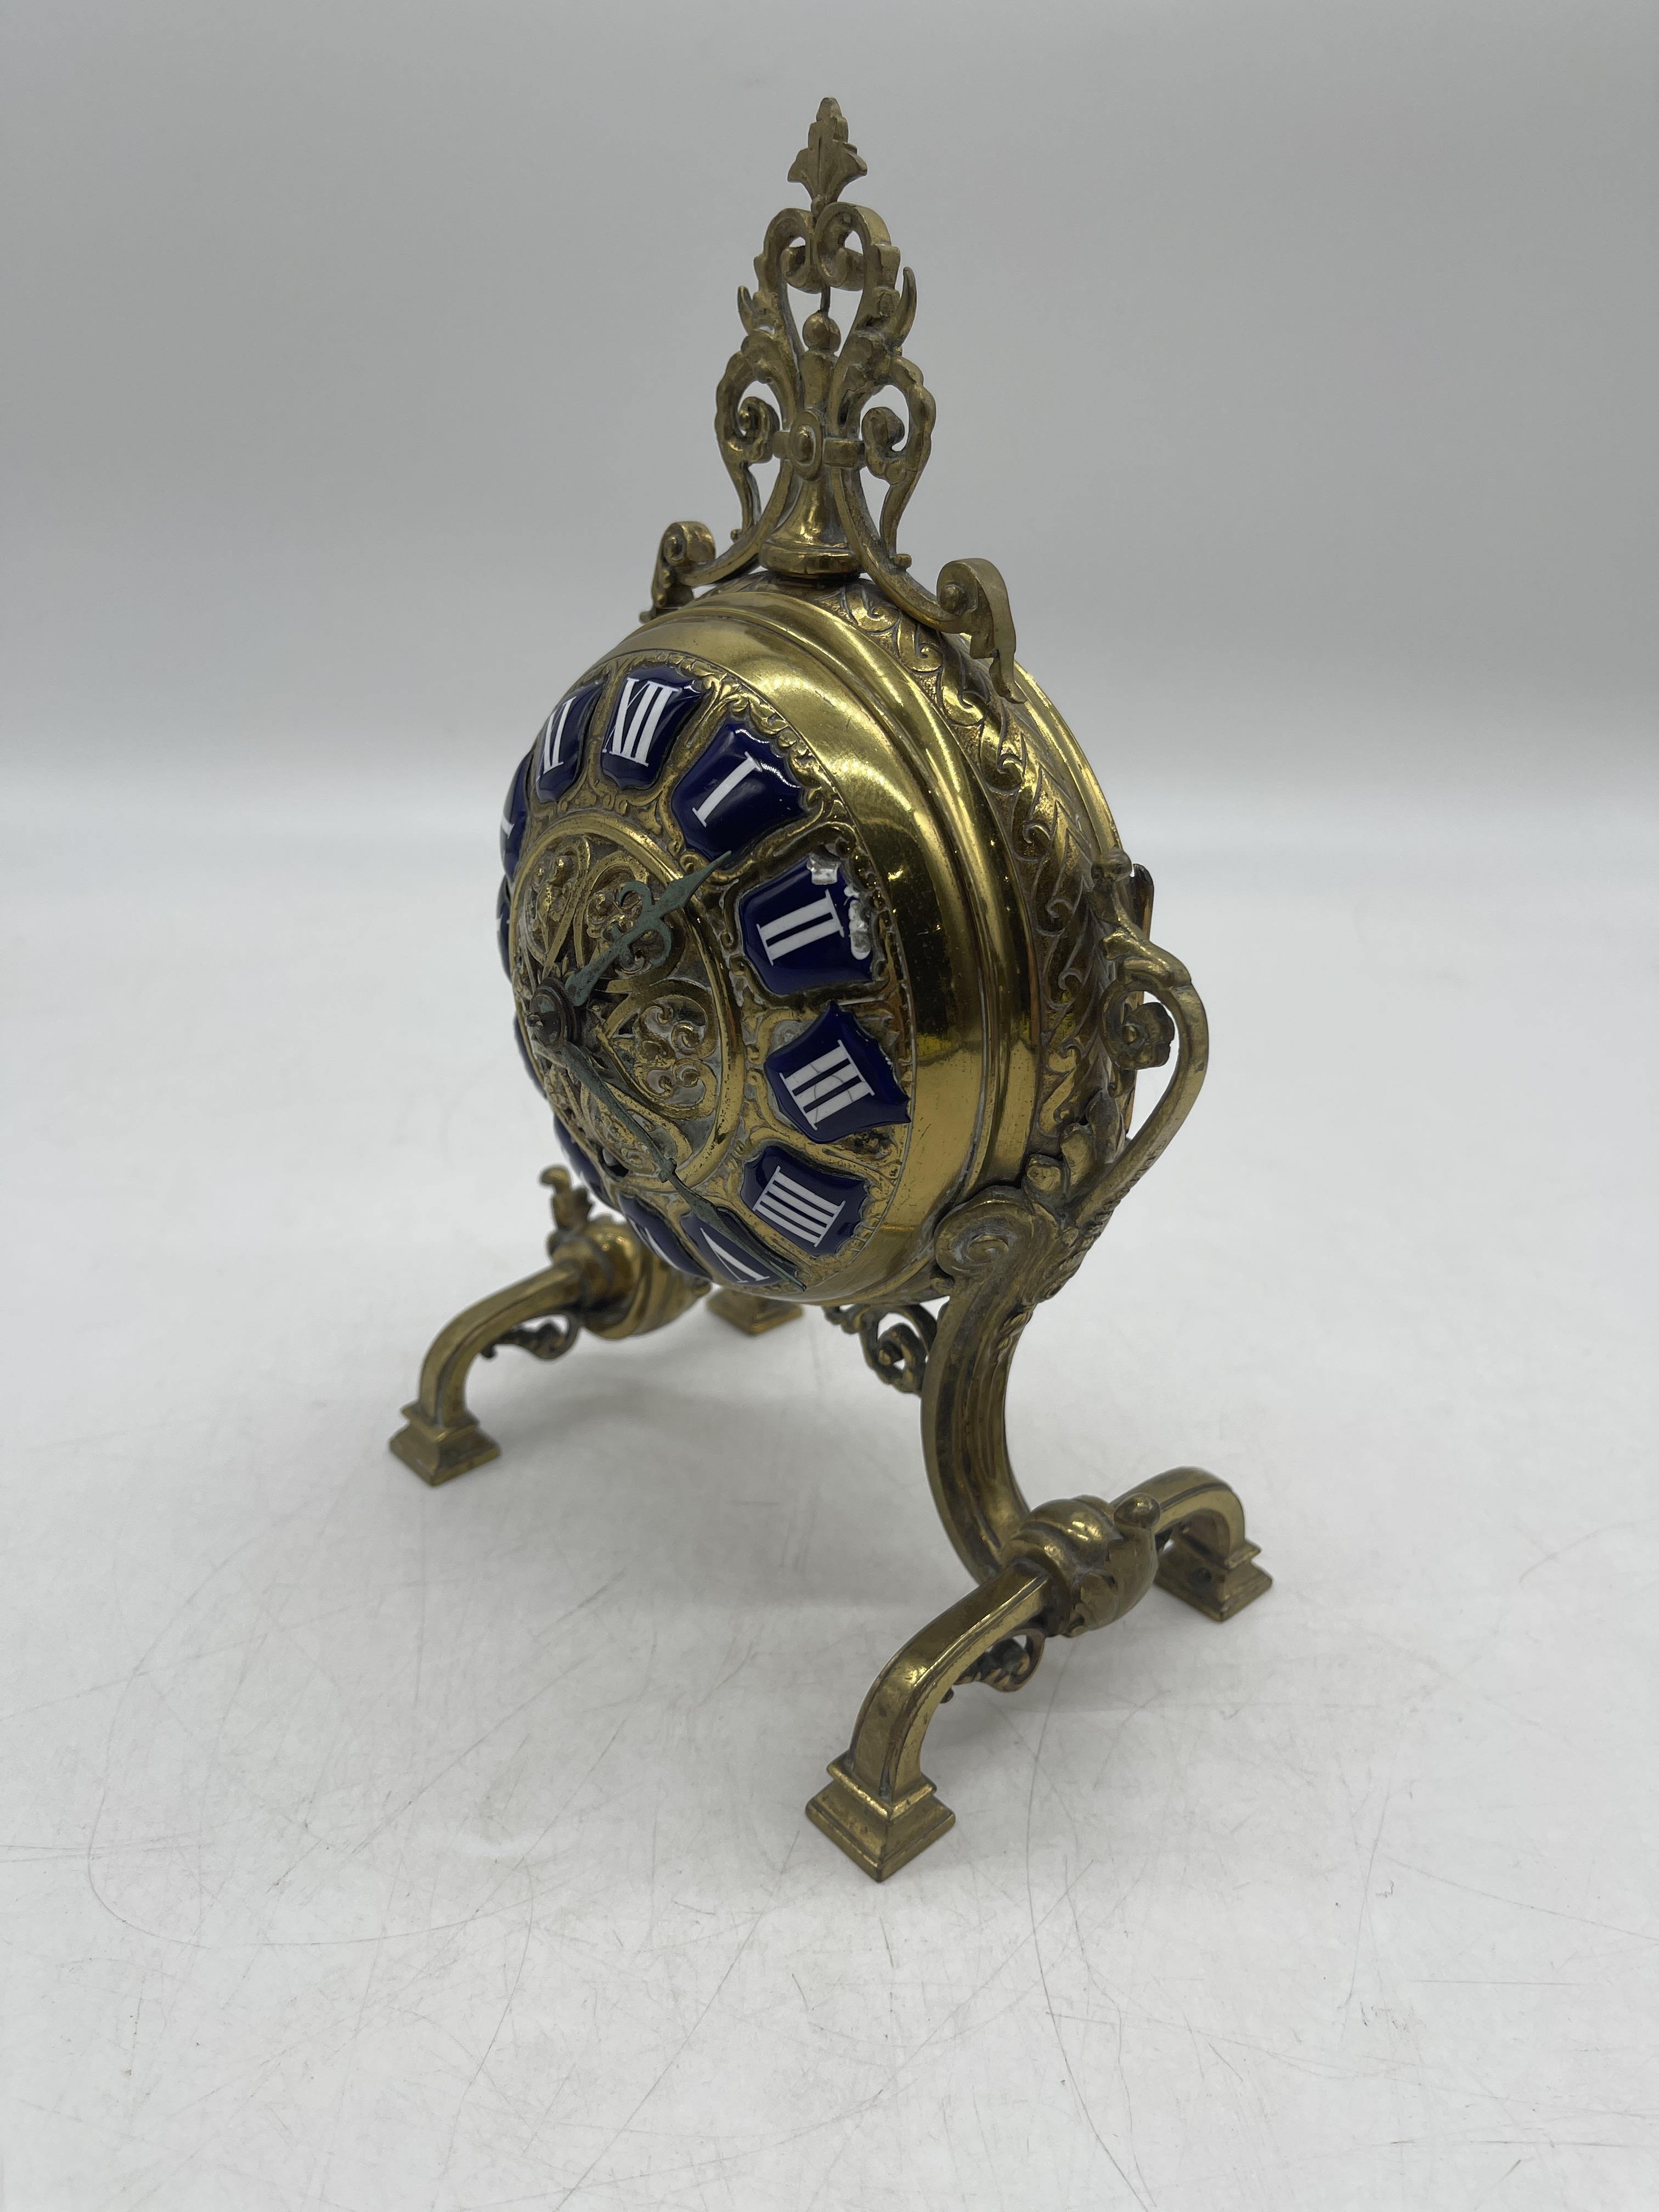 Antique French Brass and Enamel Mantel Clock. - Image 2 of 14